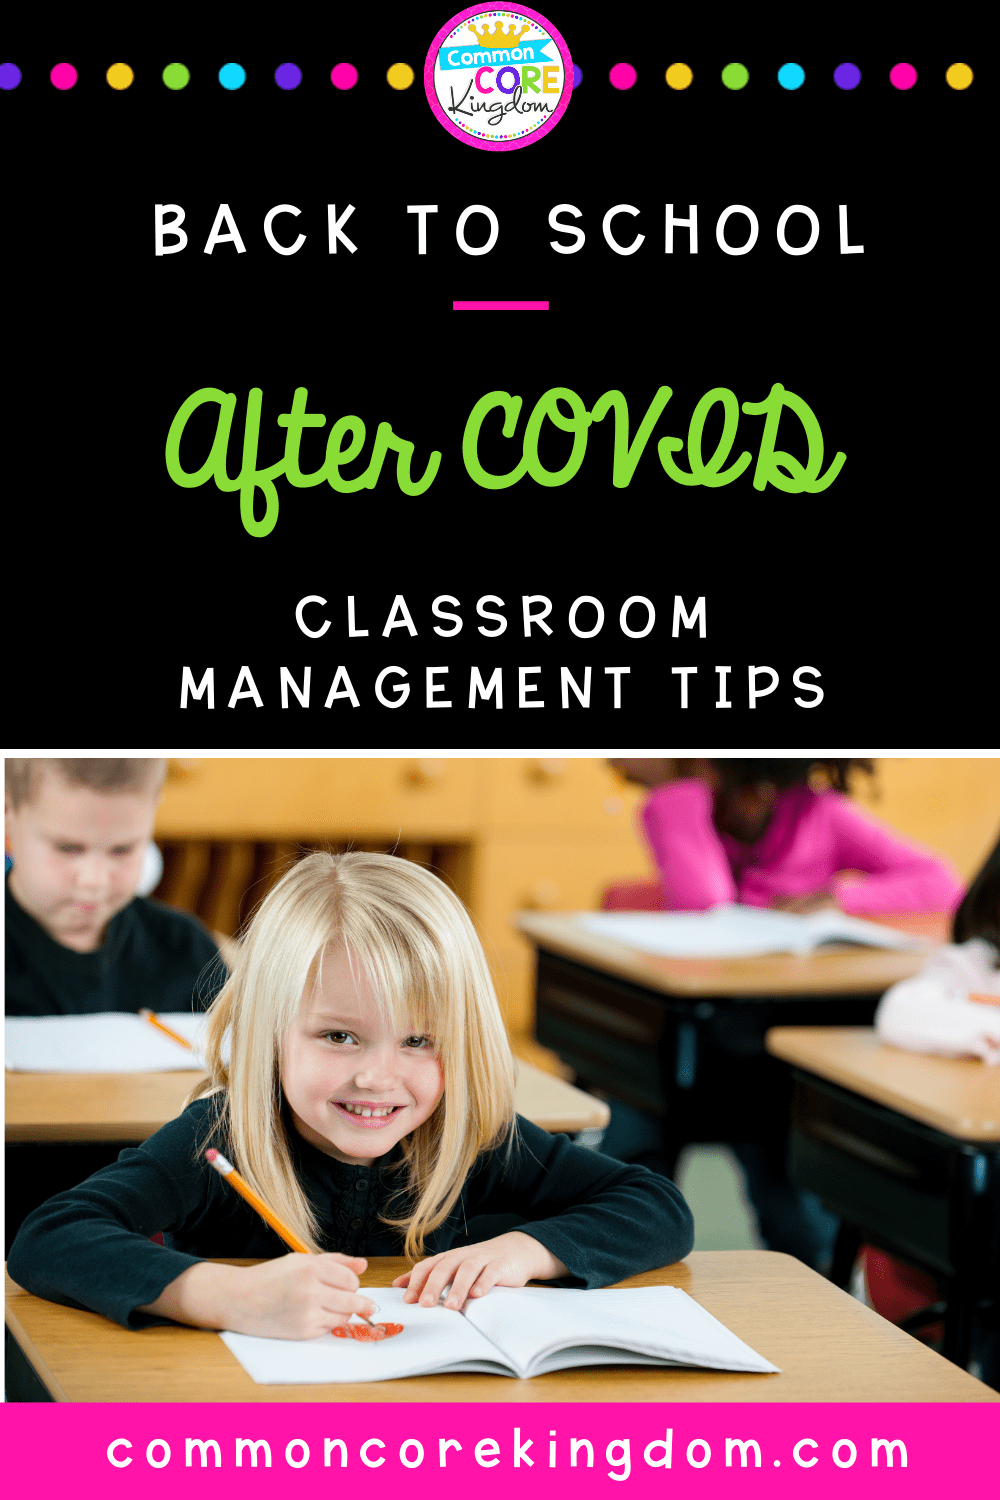 Classroom Management after COVID main image showing a student in a classroom with text